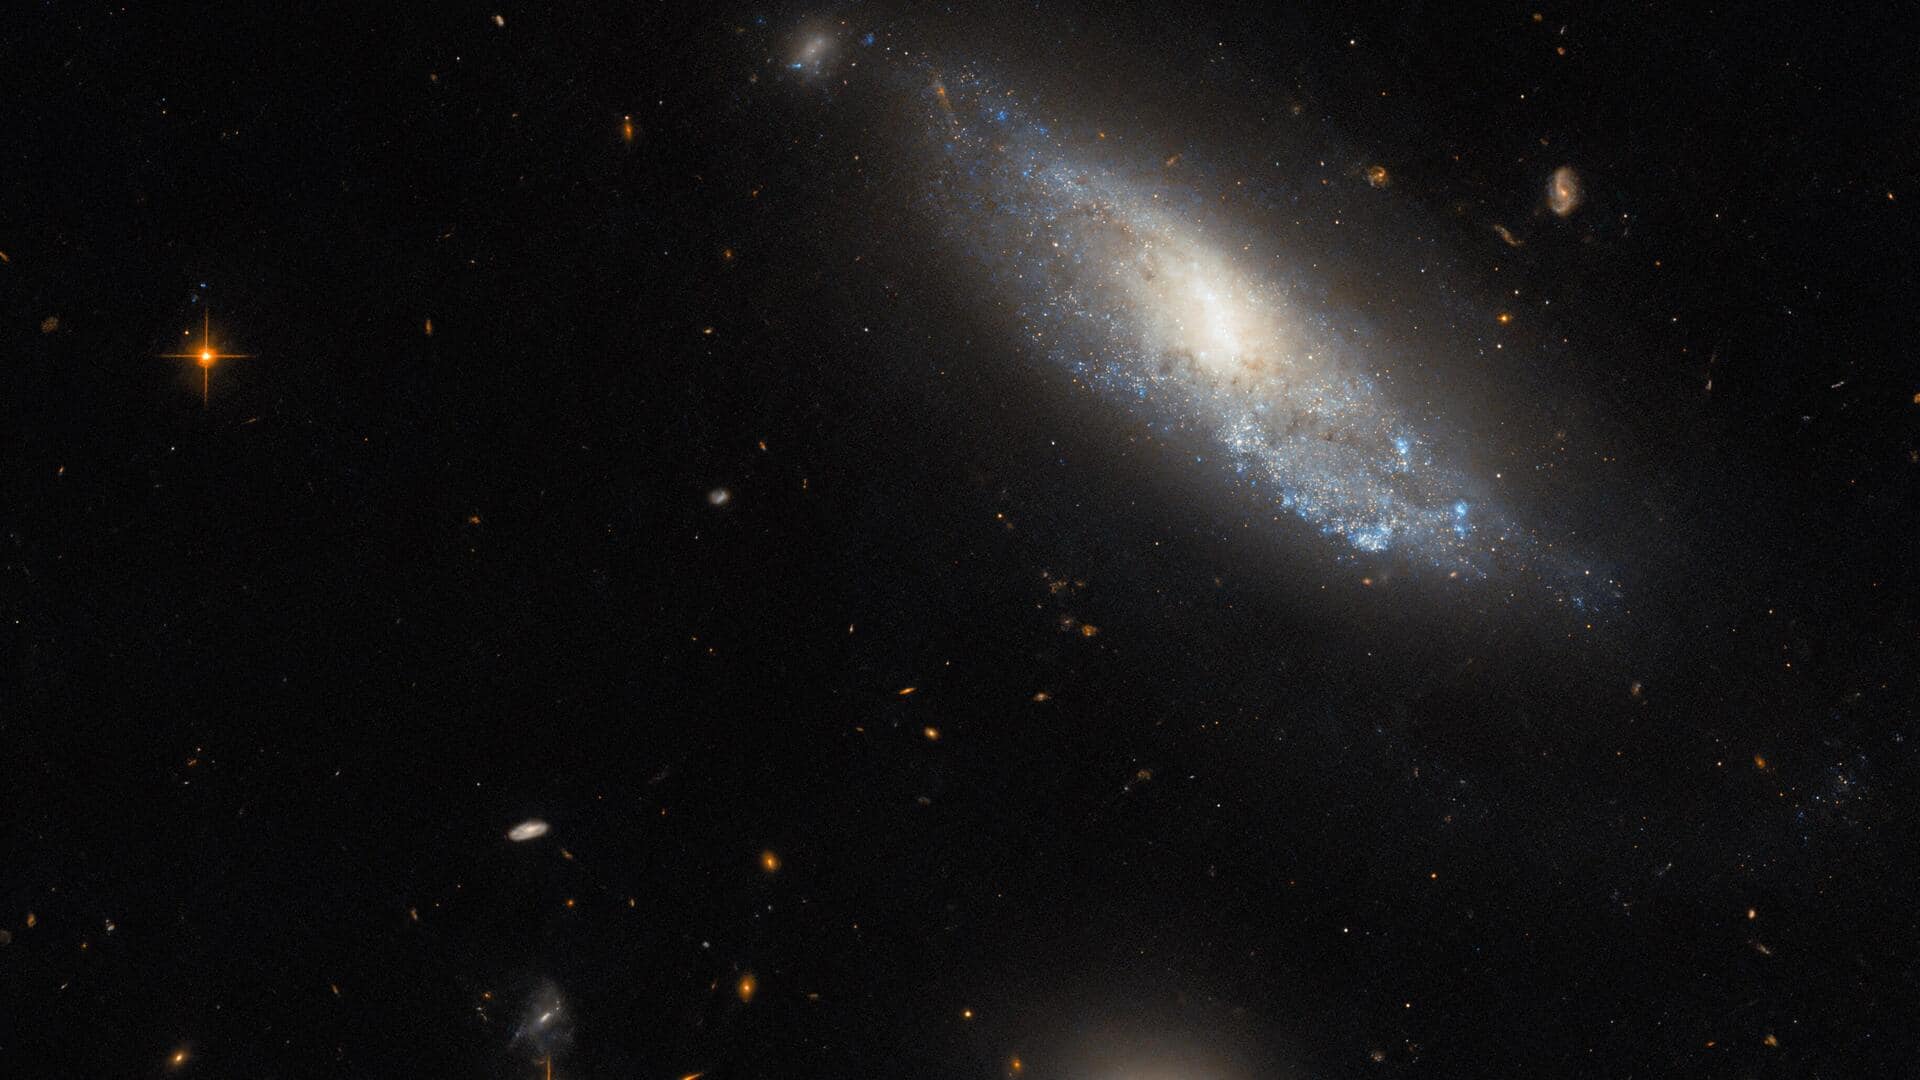 NASA's Hubble telescope captures 'catastrophic' aftermath of star explosion